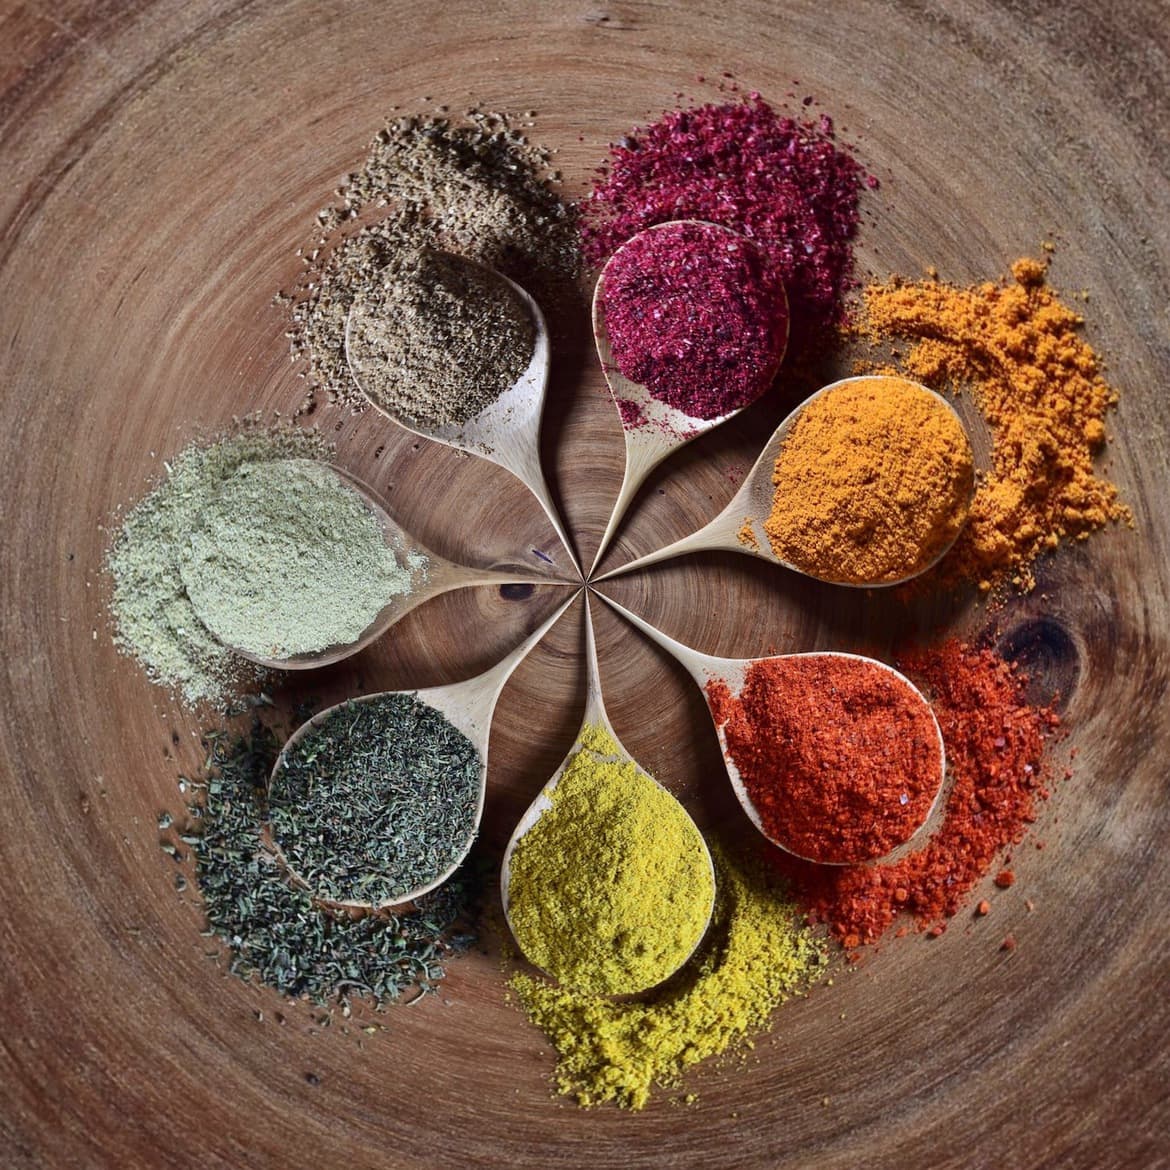 a selection of spices on spoons arranged in a circle on a brown surface